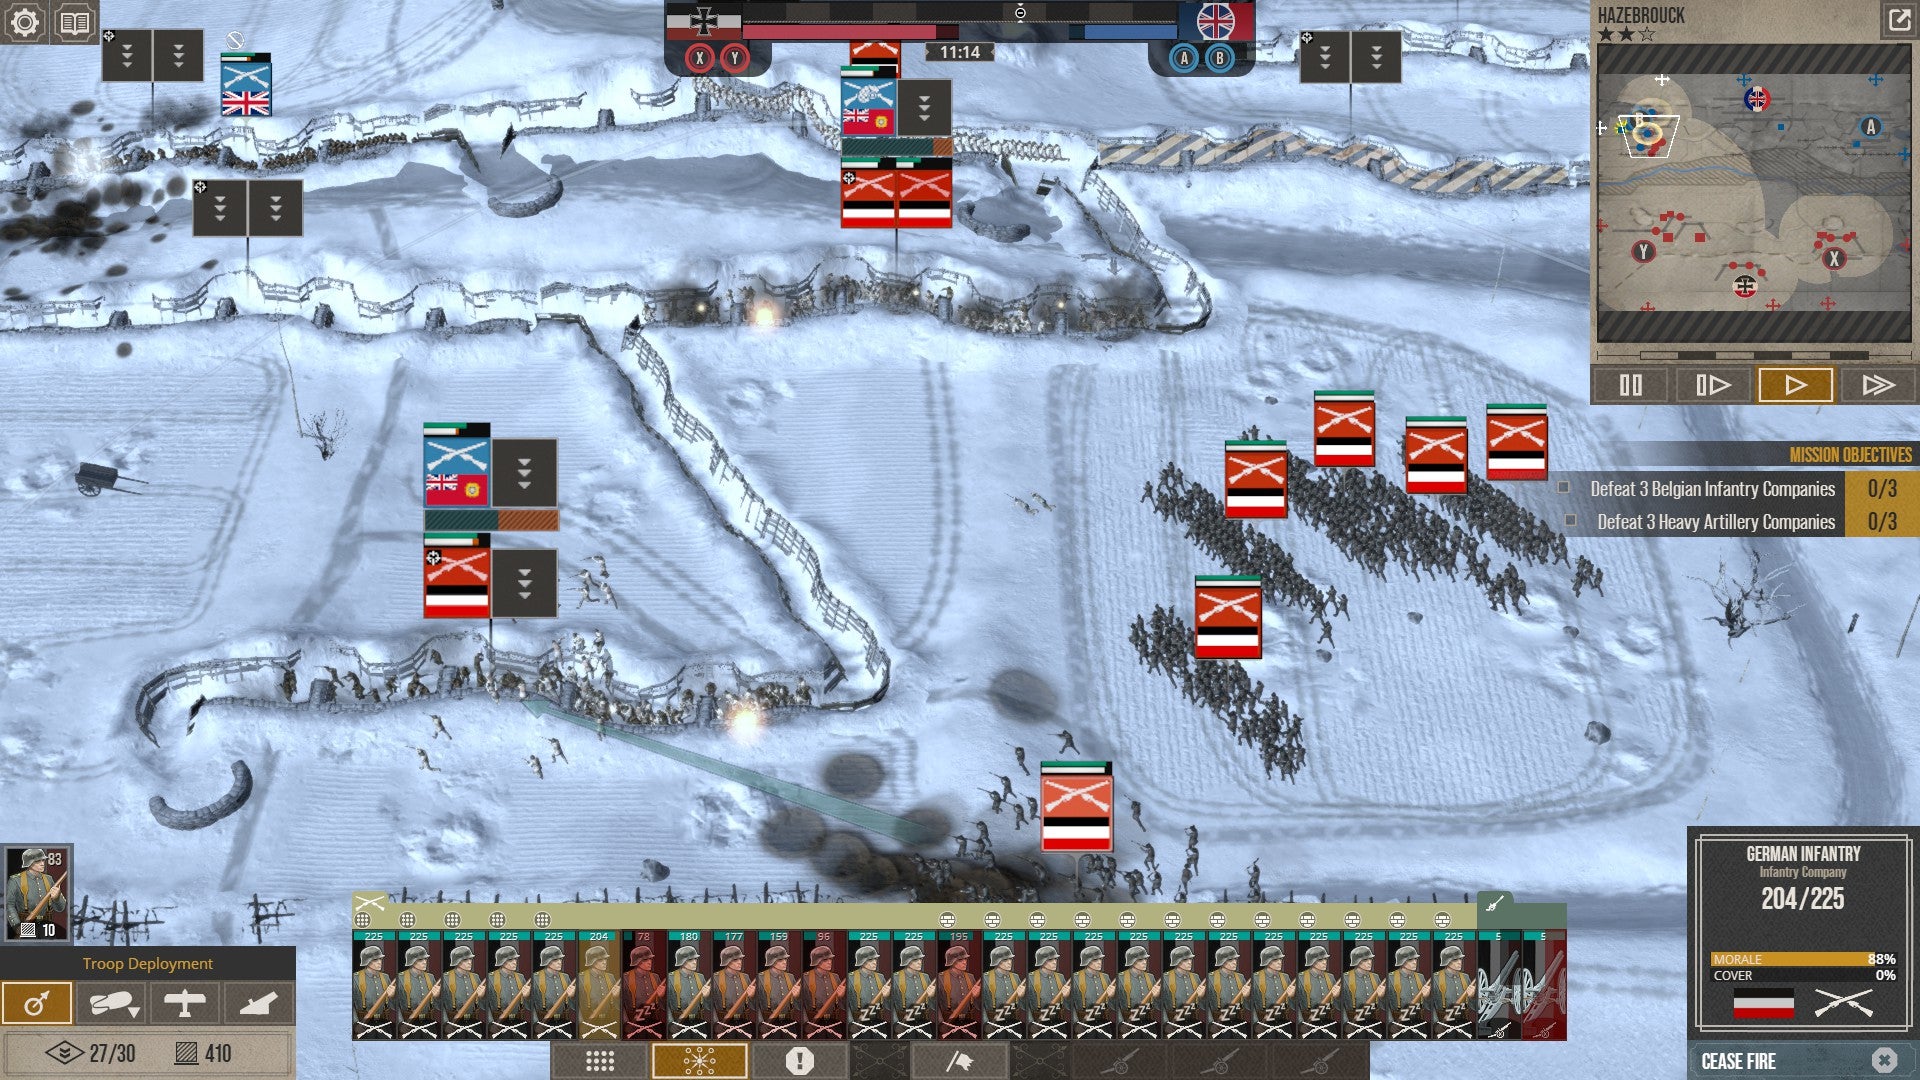 six units march through the snowy, uninhabited land in The Great War: The Western Front